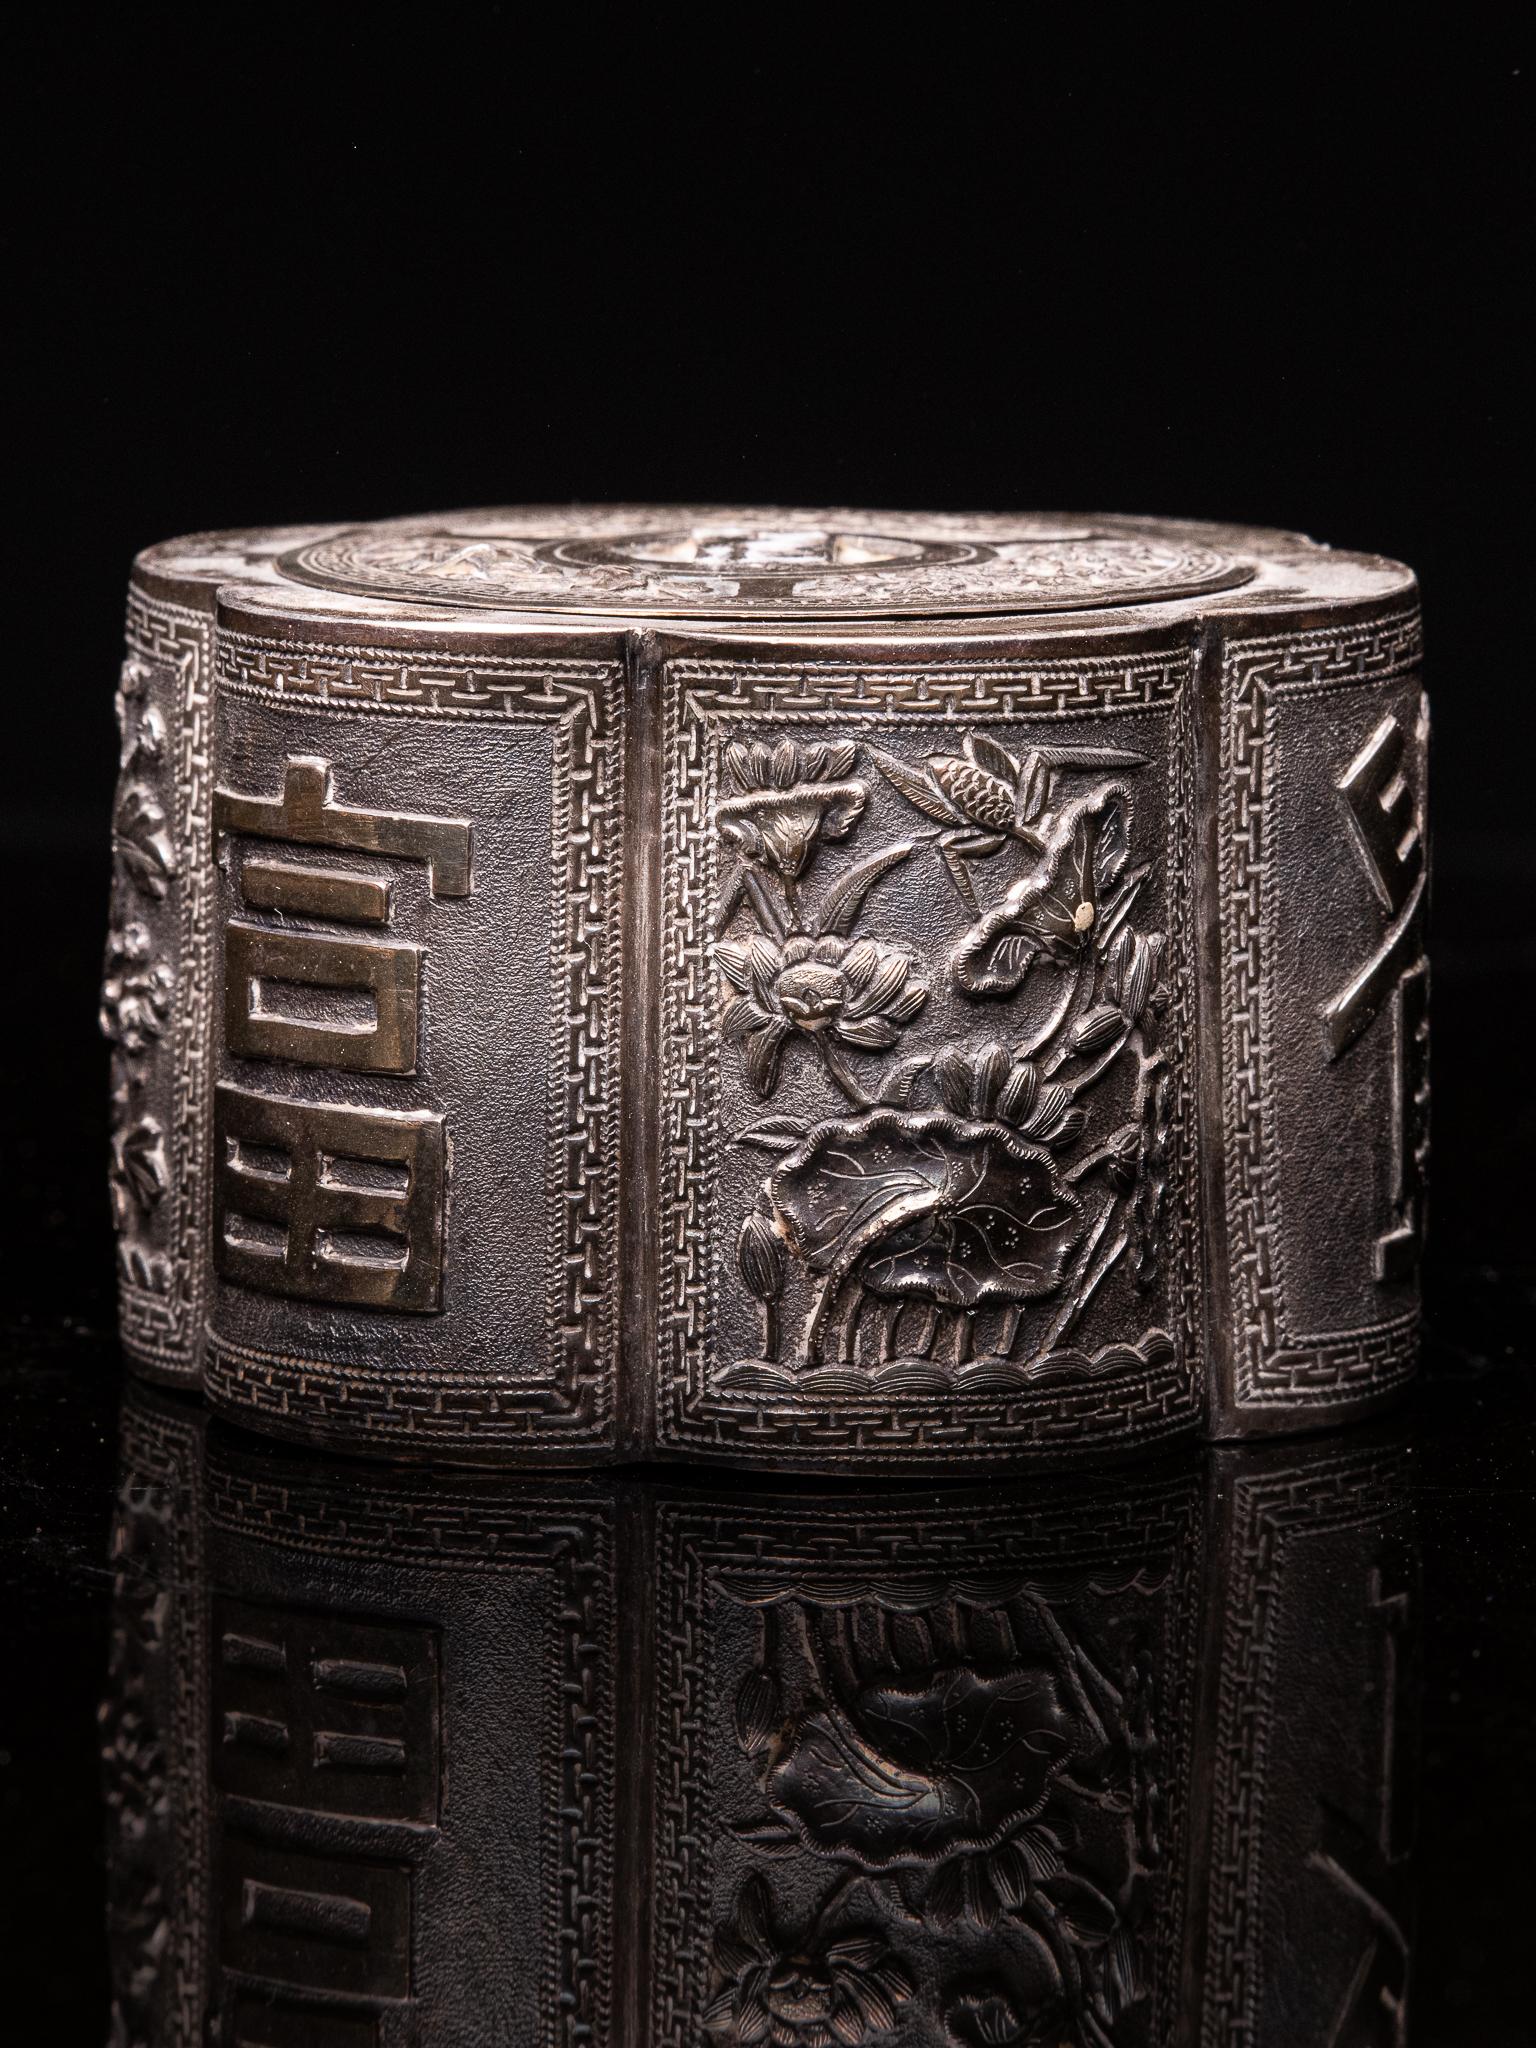 Beautiful opium box decorated with reliefs with ideograms (one of the two refers to wealth), a chrysanthemum (symbol of longevity) and foliage. This silver multi-lobed opium box is decorated with ideograms and flowers for luxury and longevity.